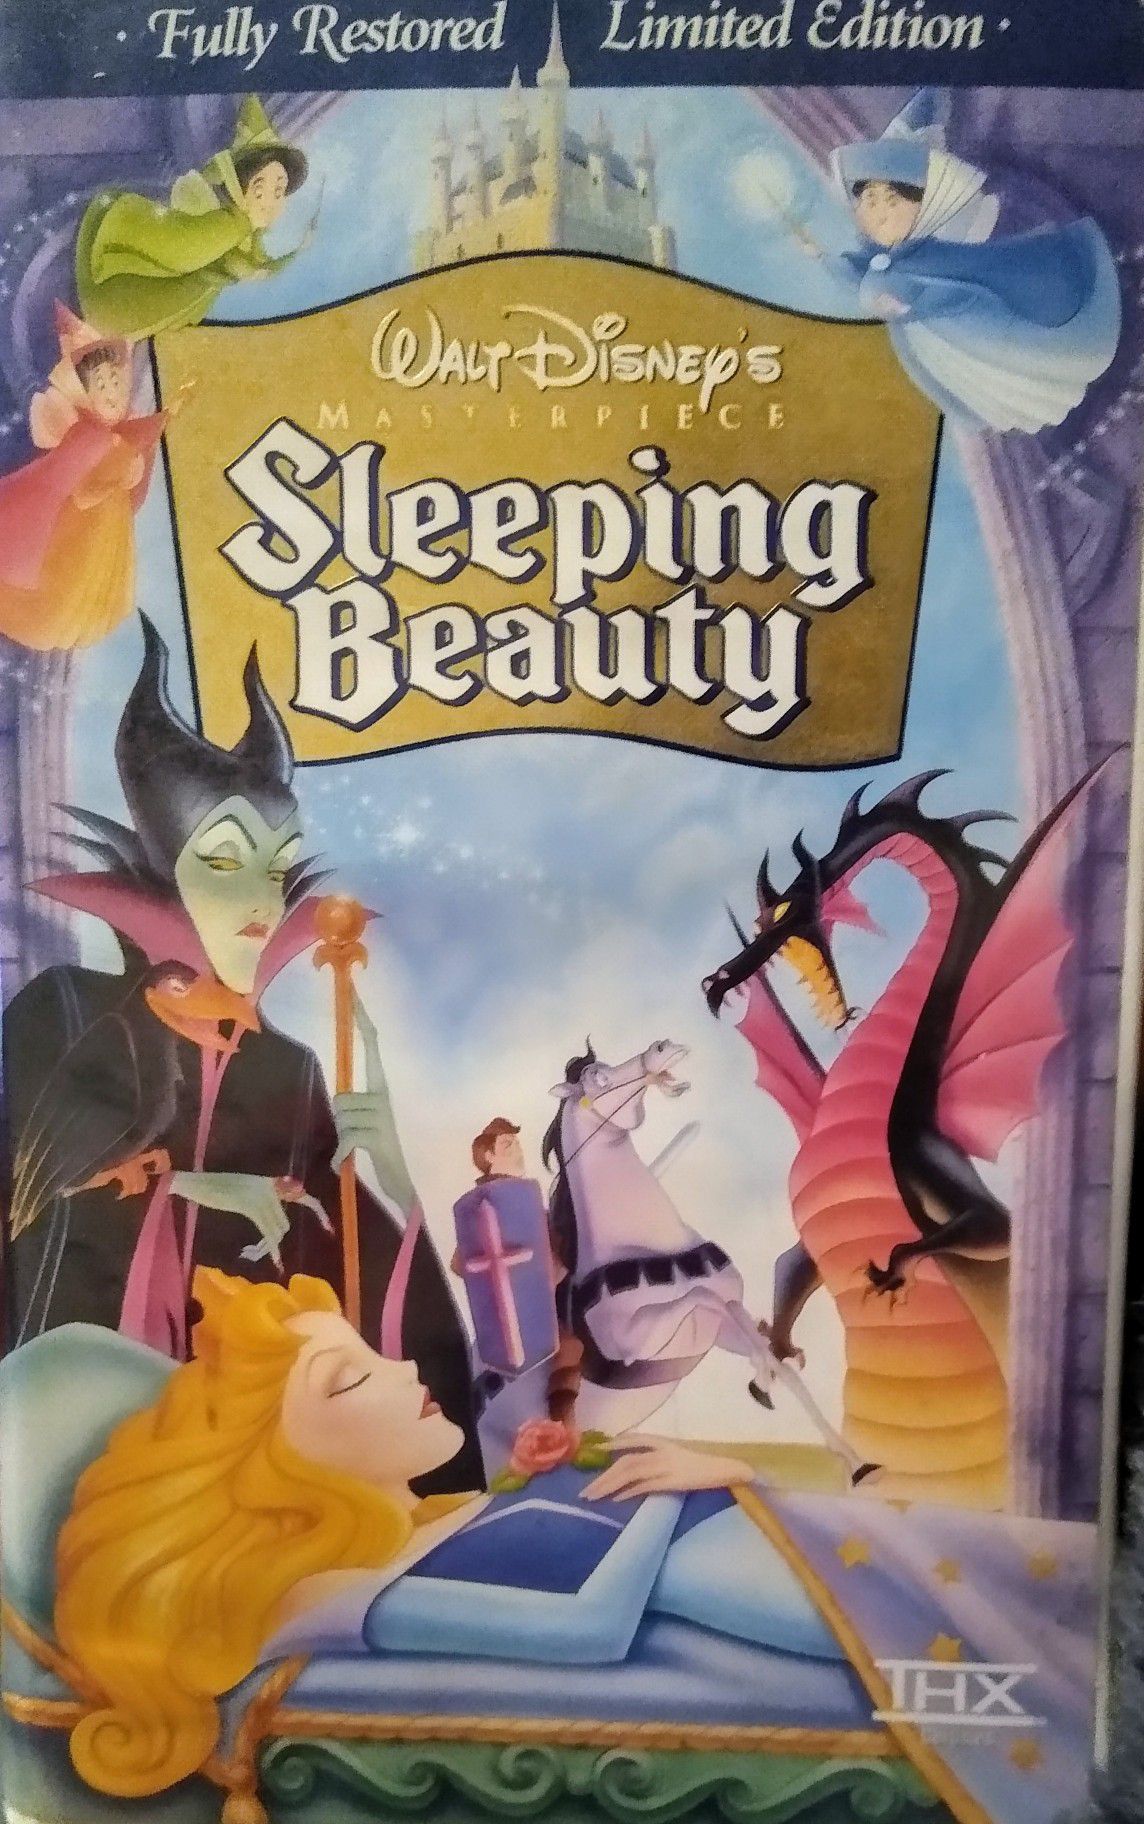 Disney's Sleeping Beauty Masterpiece Collection fully restored Limited Edition, VHS